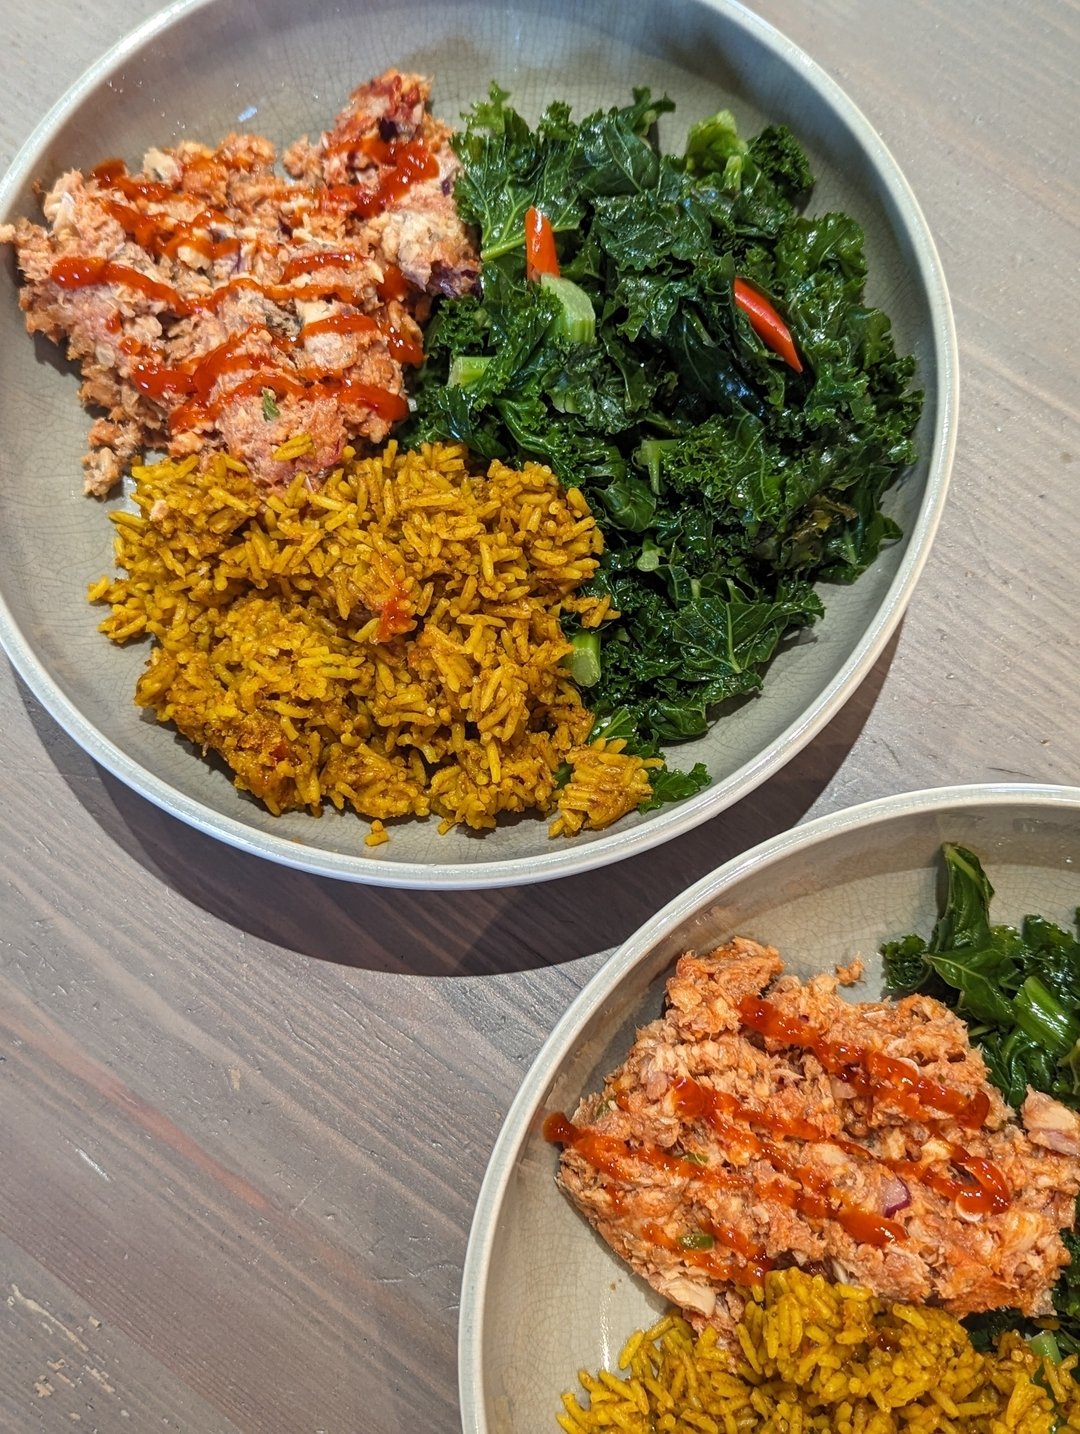 Welcome to another episode of &quot;Everything Here Is Processed&quot;.

Canned salmon with sriracha sauce, stir fried spicy kale and Aldi's piri piri microwaveable rice.

Delicious! 

#habits #eatwell  #nutritioncoaching #coaching #goodnutrition #ma